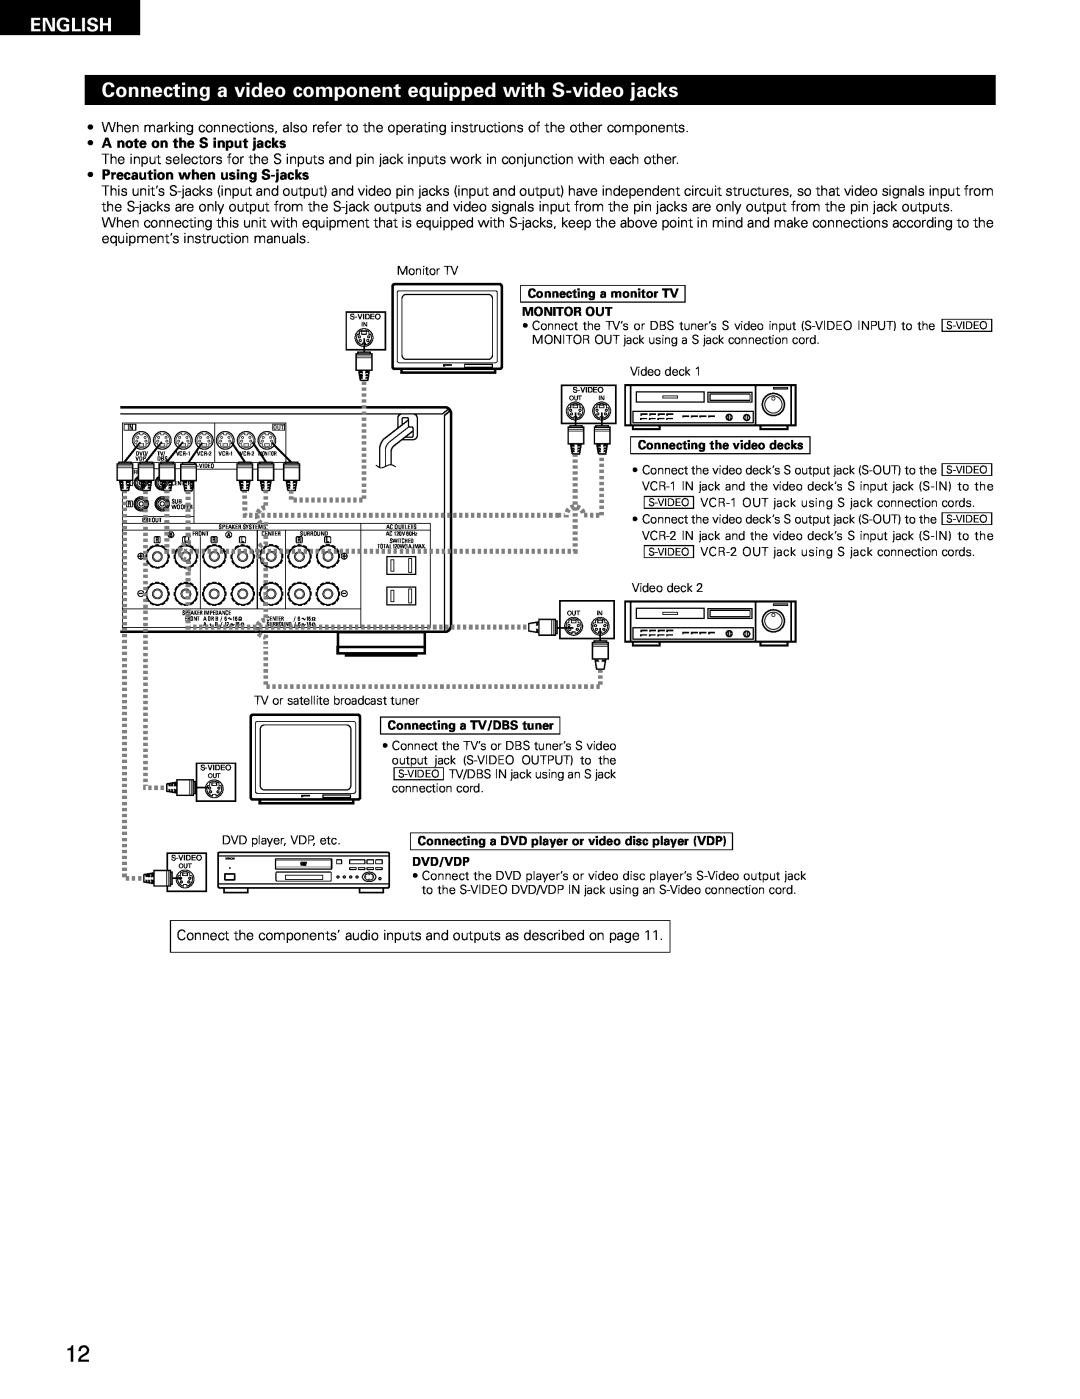 Denon AVR-1802/882 manual English, A note on the S input jacks, Precaution when using S-jacks, Connecting the video decks 